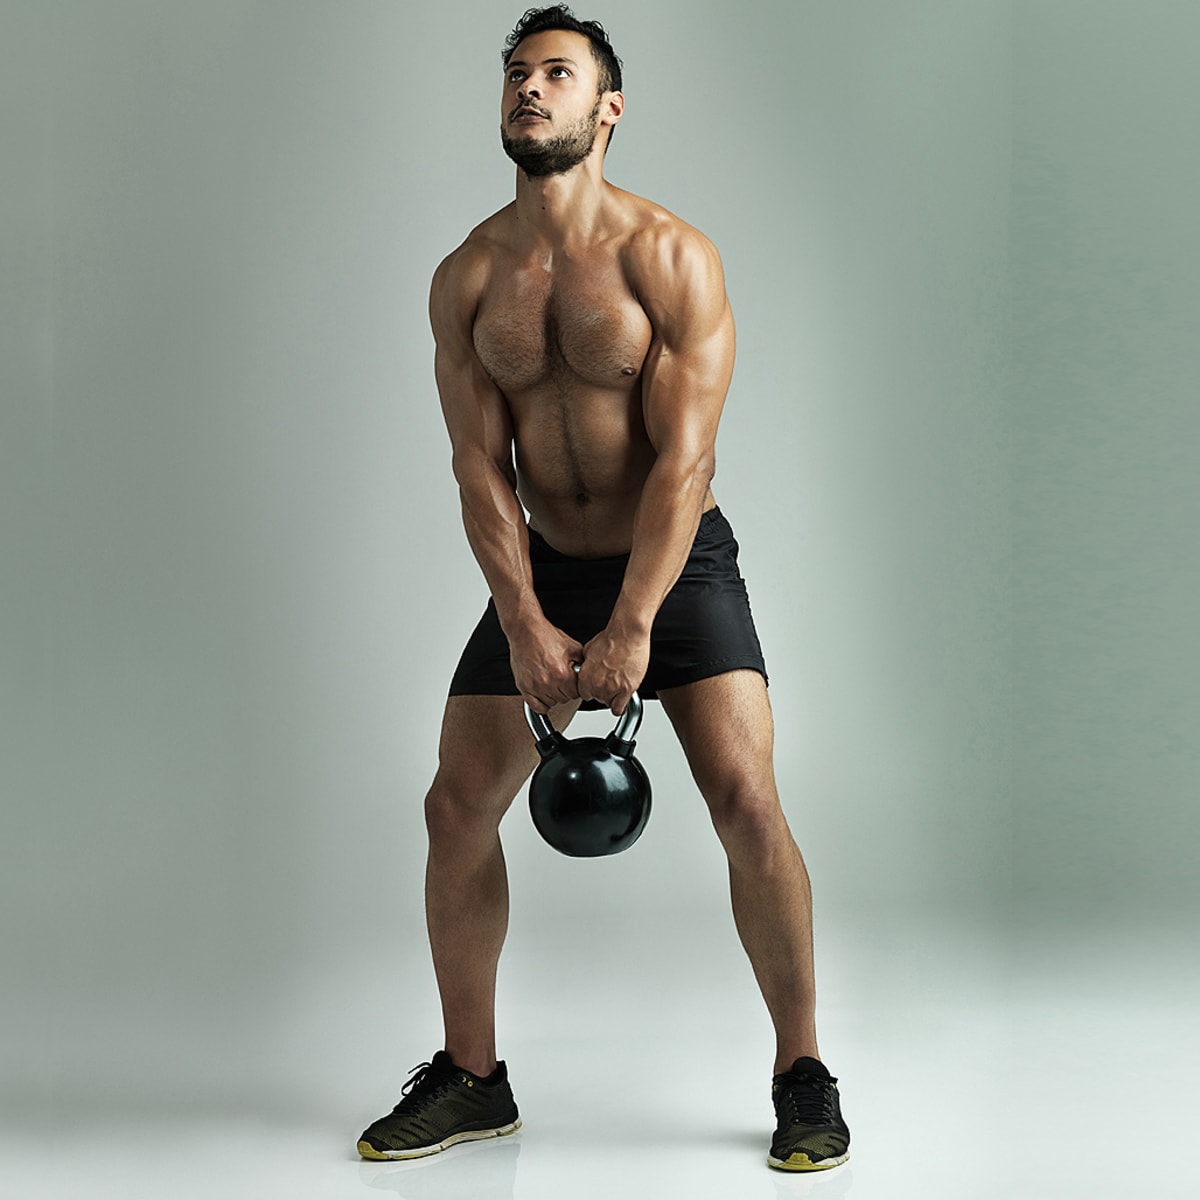 Muscular shirtless man workout with kettlebells in L Sit position